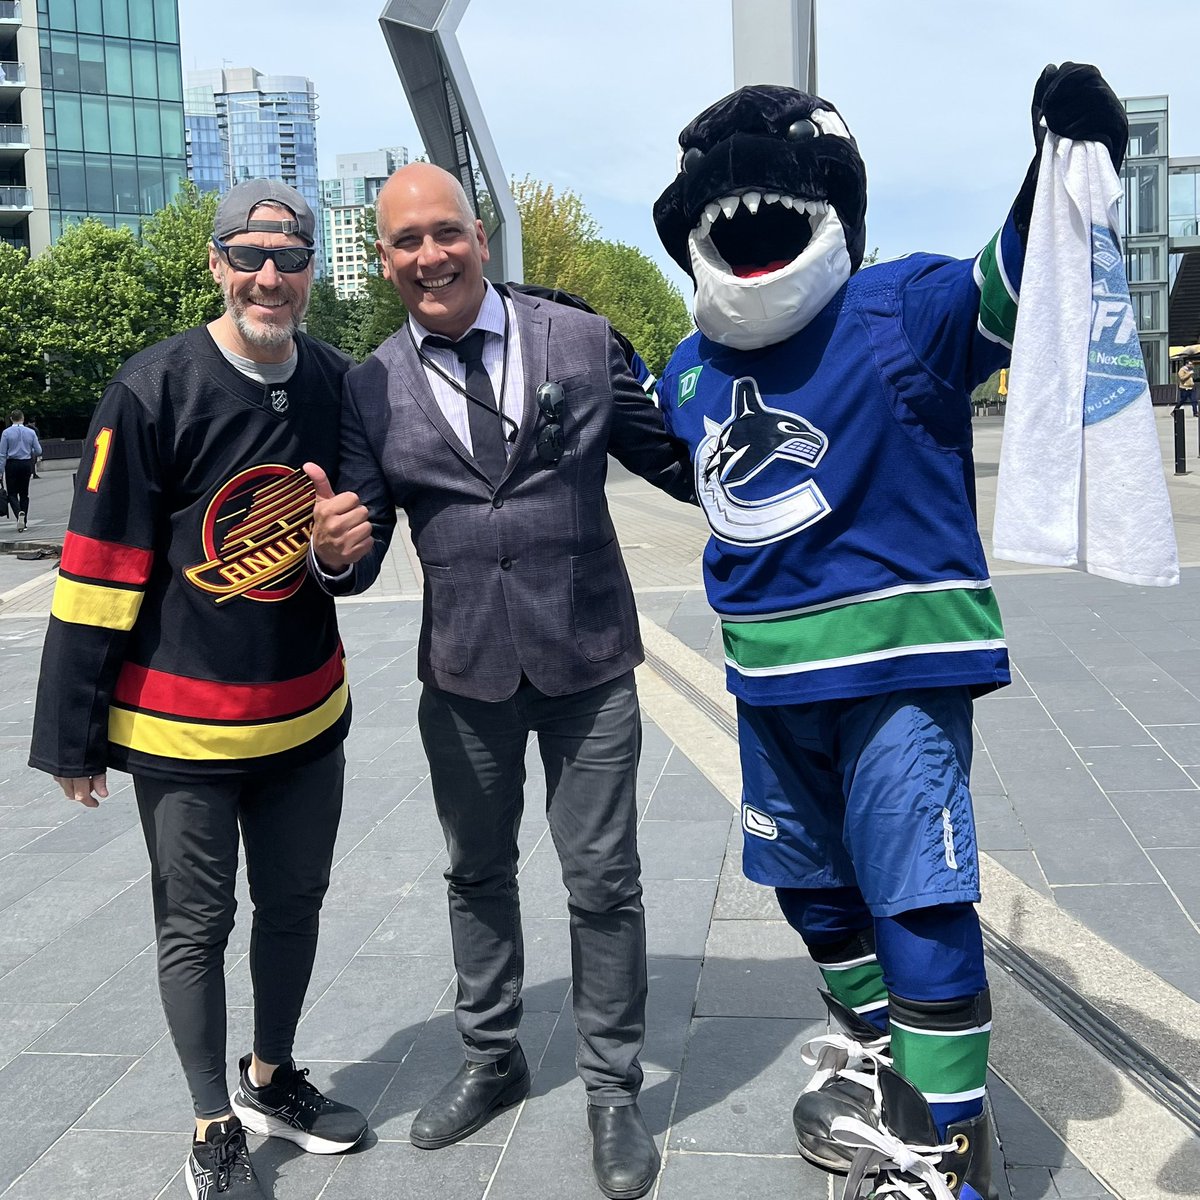 Spotted by the Jack Poole Plaza: Hall of Famer Captain Kirk @1kirkmclean McLean and @Canucks Fin handing out swag and hyping the fans! Round 2, Game 4puck drops tonight at 6:30! 🥅🏒 #GoCanucksGo #TowelPower